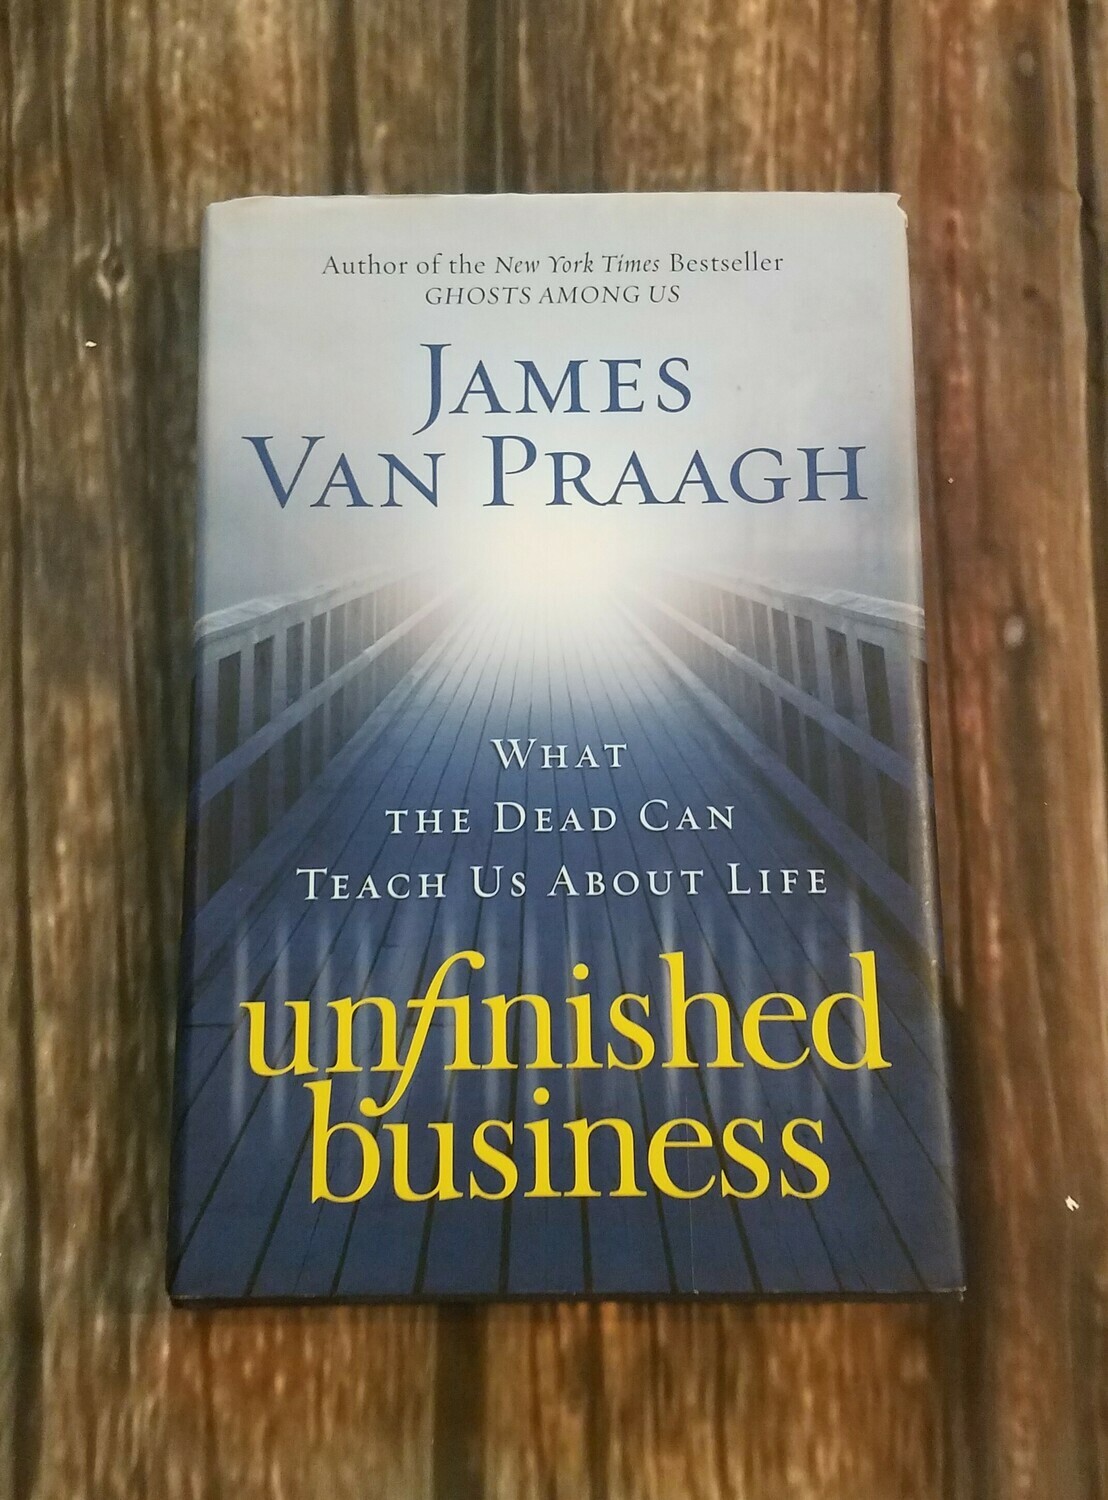 Unfinished Business by James Van Praagh